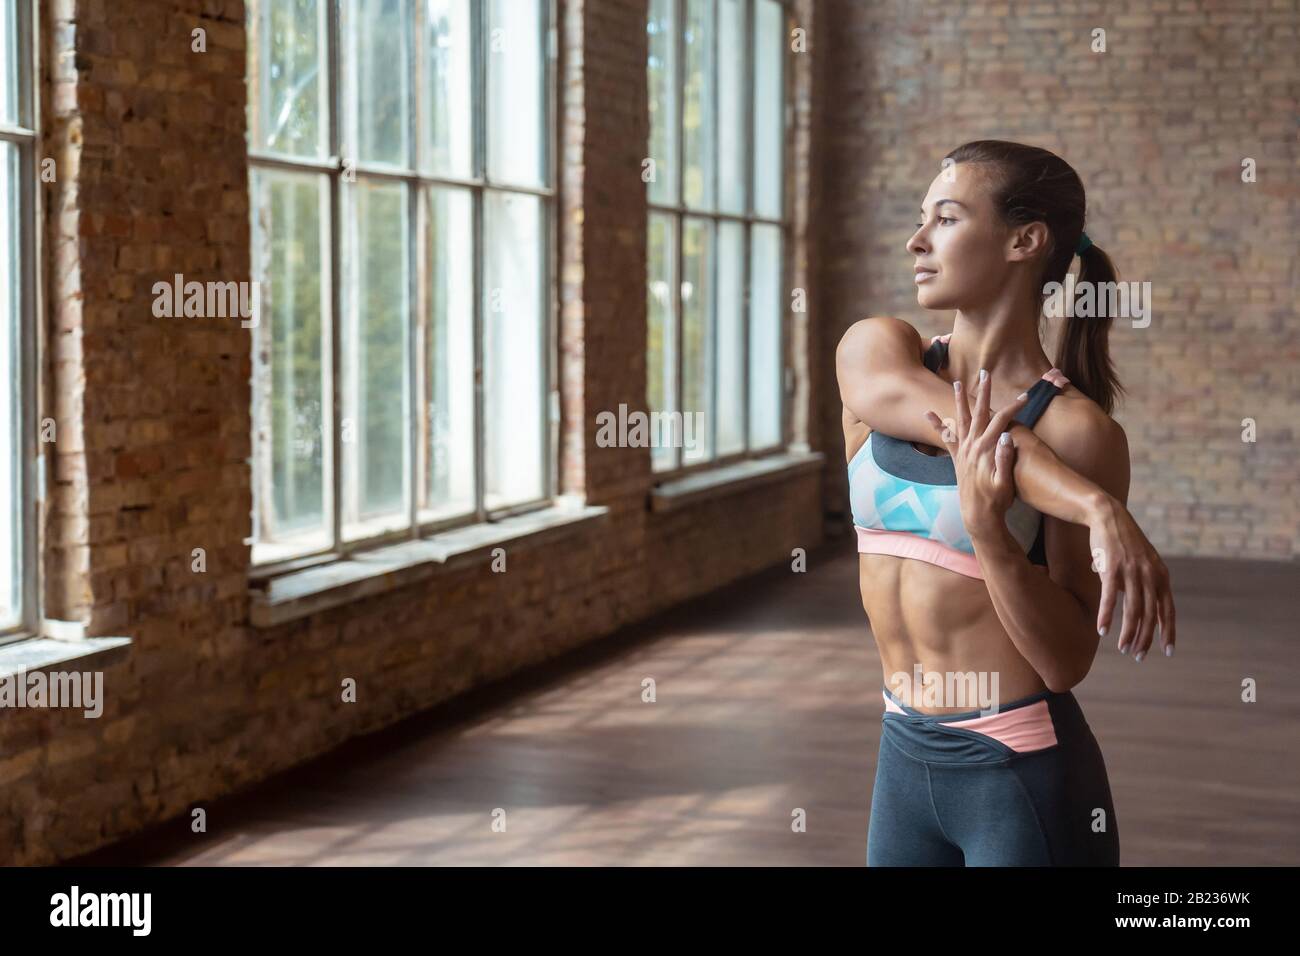 Sporty young woman fitness coach warm up stretch hand. Stock Photo